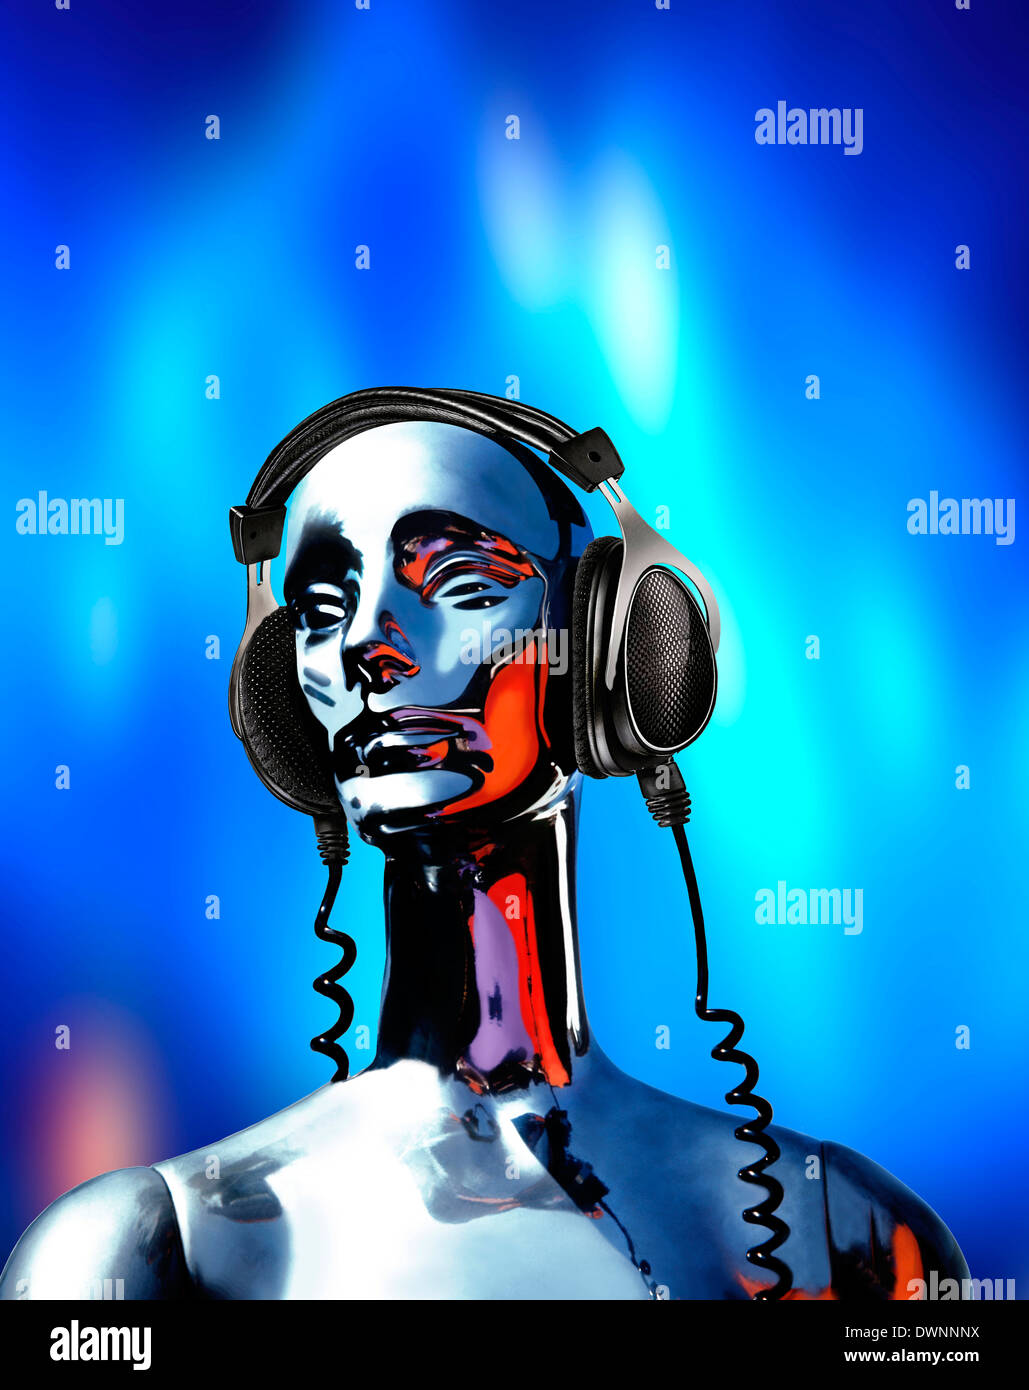 A chrome mannequin wearing headphones Stock Photo